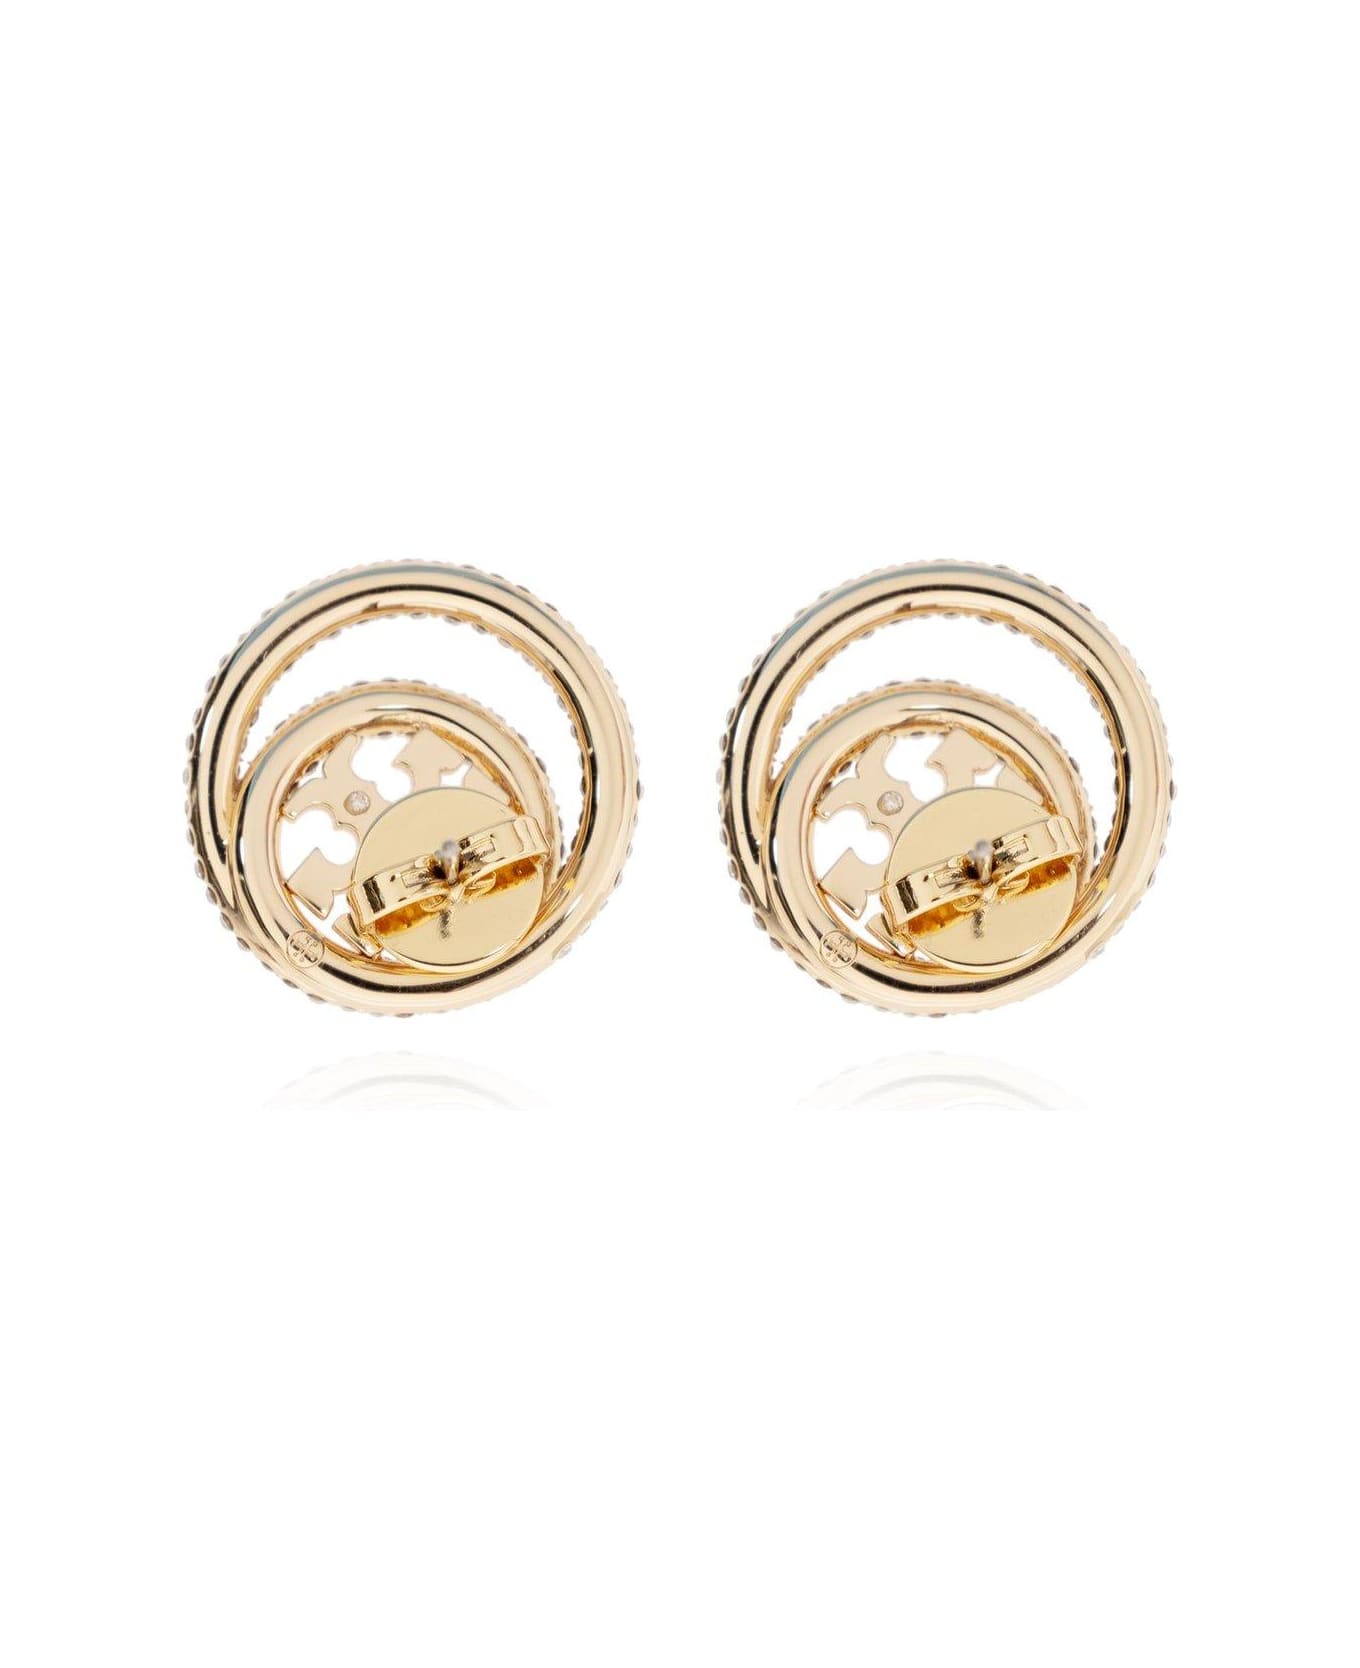 Tory Burch Double-ring Embellished Earrings - Gold/crystal